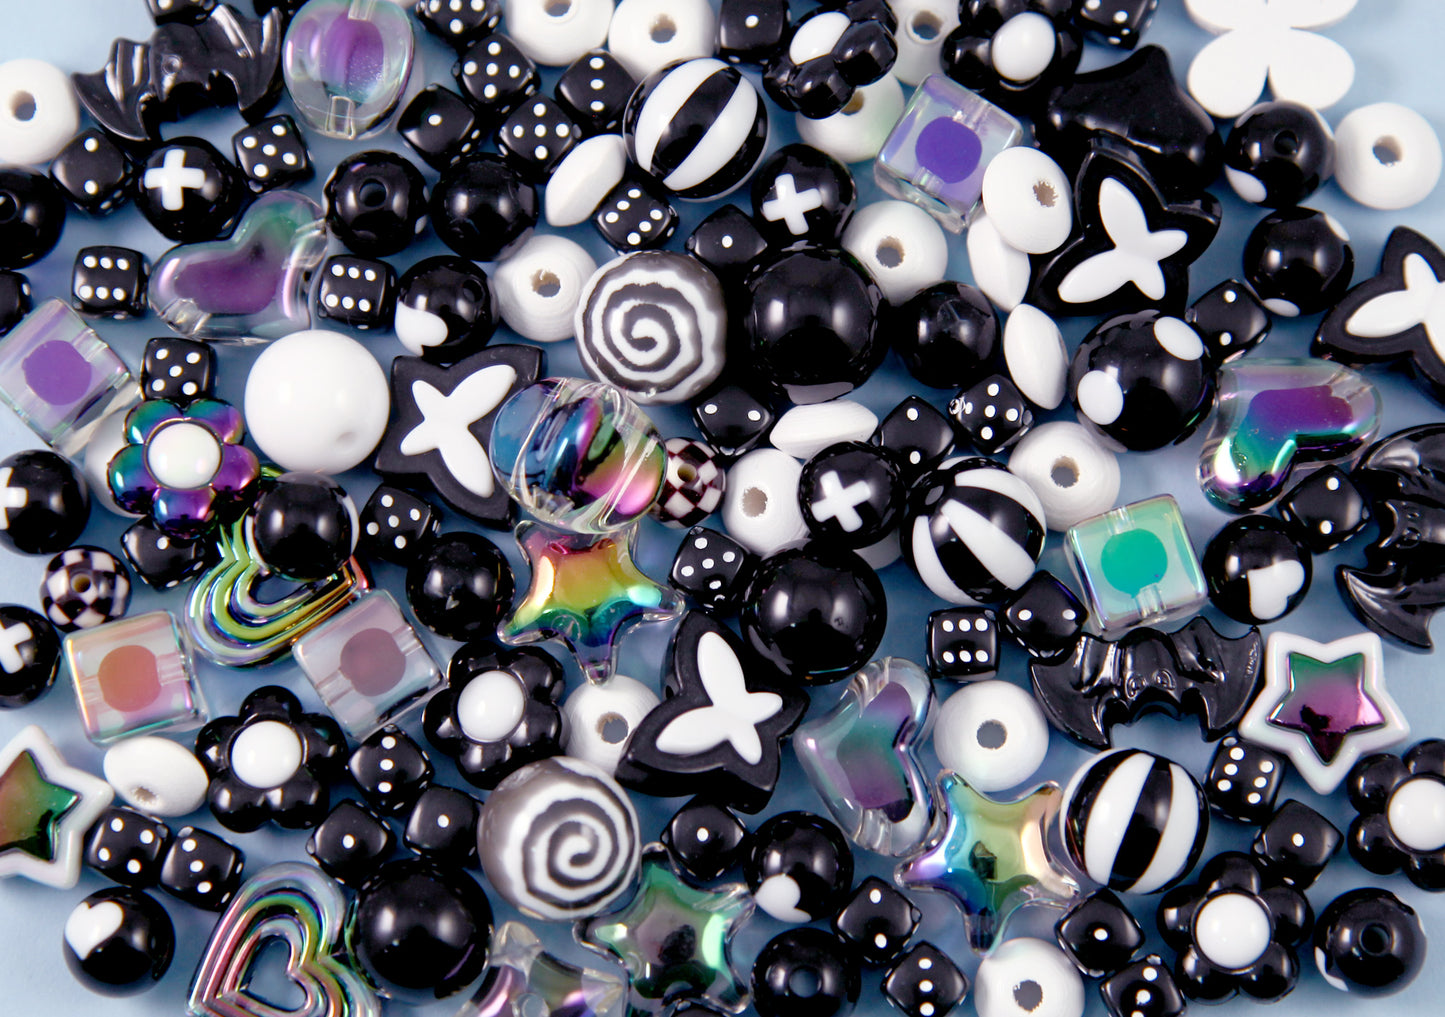 Acrylic Bead Grab Bag - Black and White - Mixed Lot of Plastic Beads - great for kandi, ispy, sensory crafts, jewelry making - Over 200 pcs